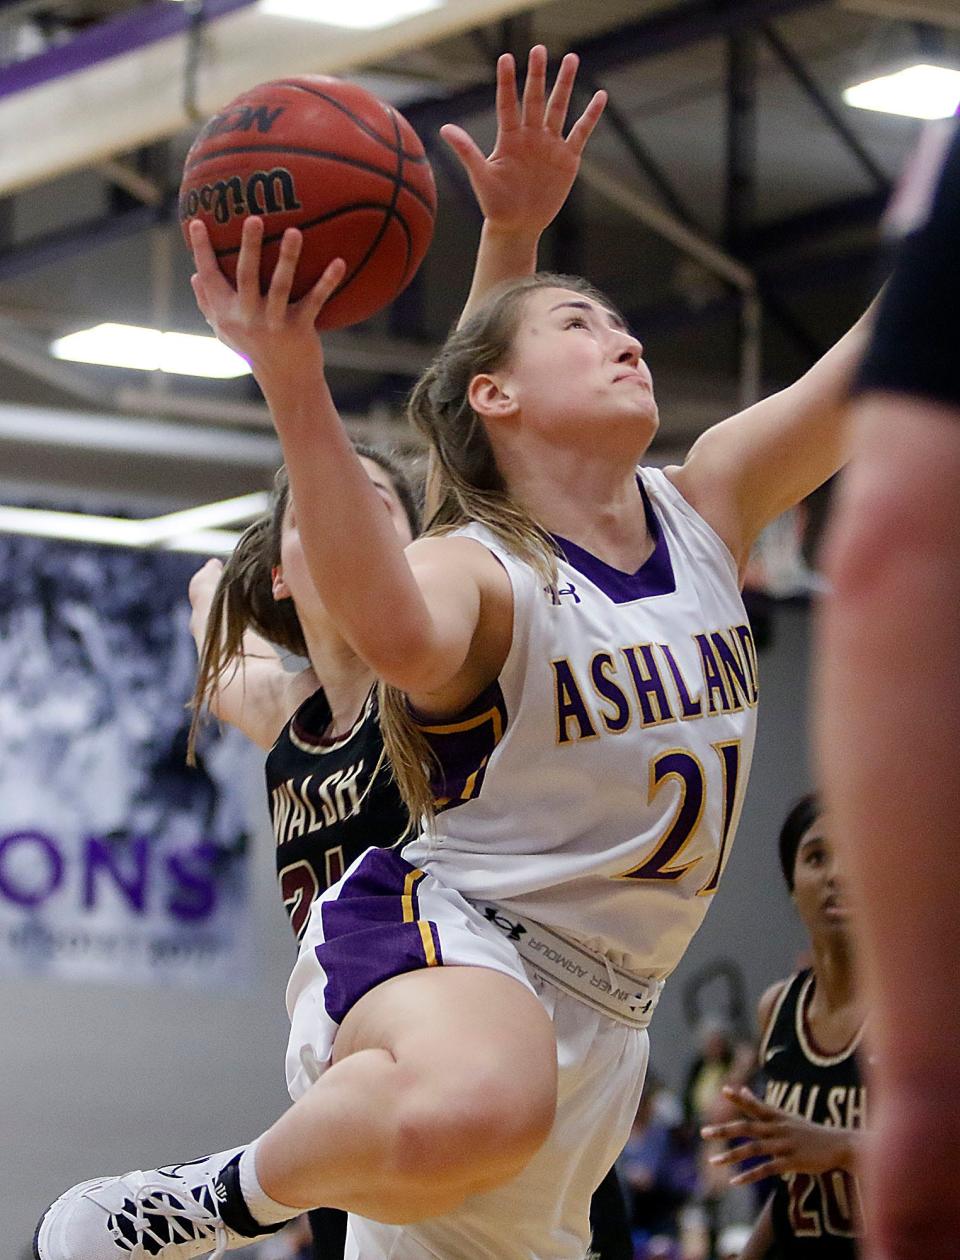 Ashland University's Macy Spielman (21) drives in for a shot against Walsh University during first half college women's basketball action in the Great Midwest Athletic Conference tournament championship game on Saturday, March 5, 2022 at Kates Gymnasium. TOM E. PUSKAR/TIMES-GAZETTE.COM